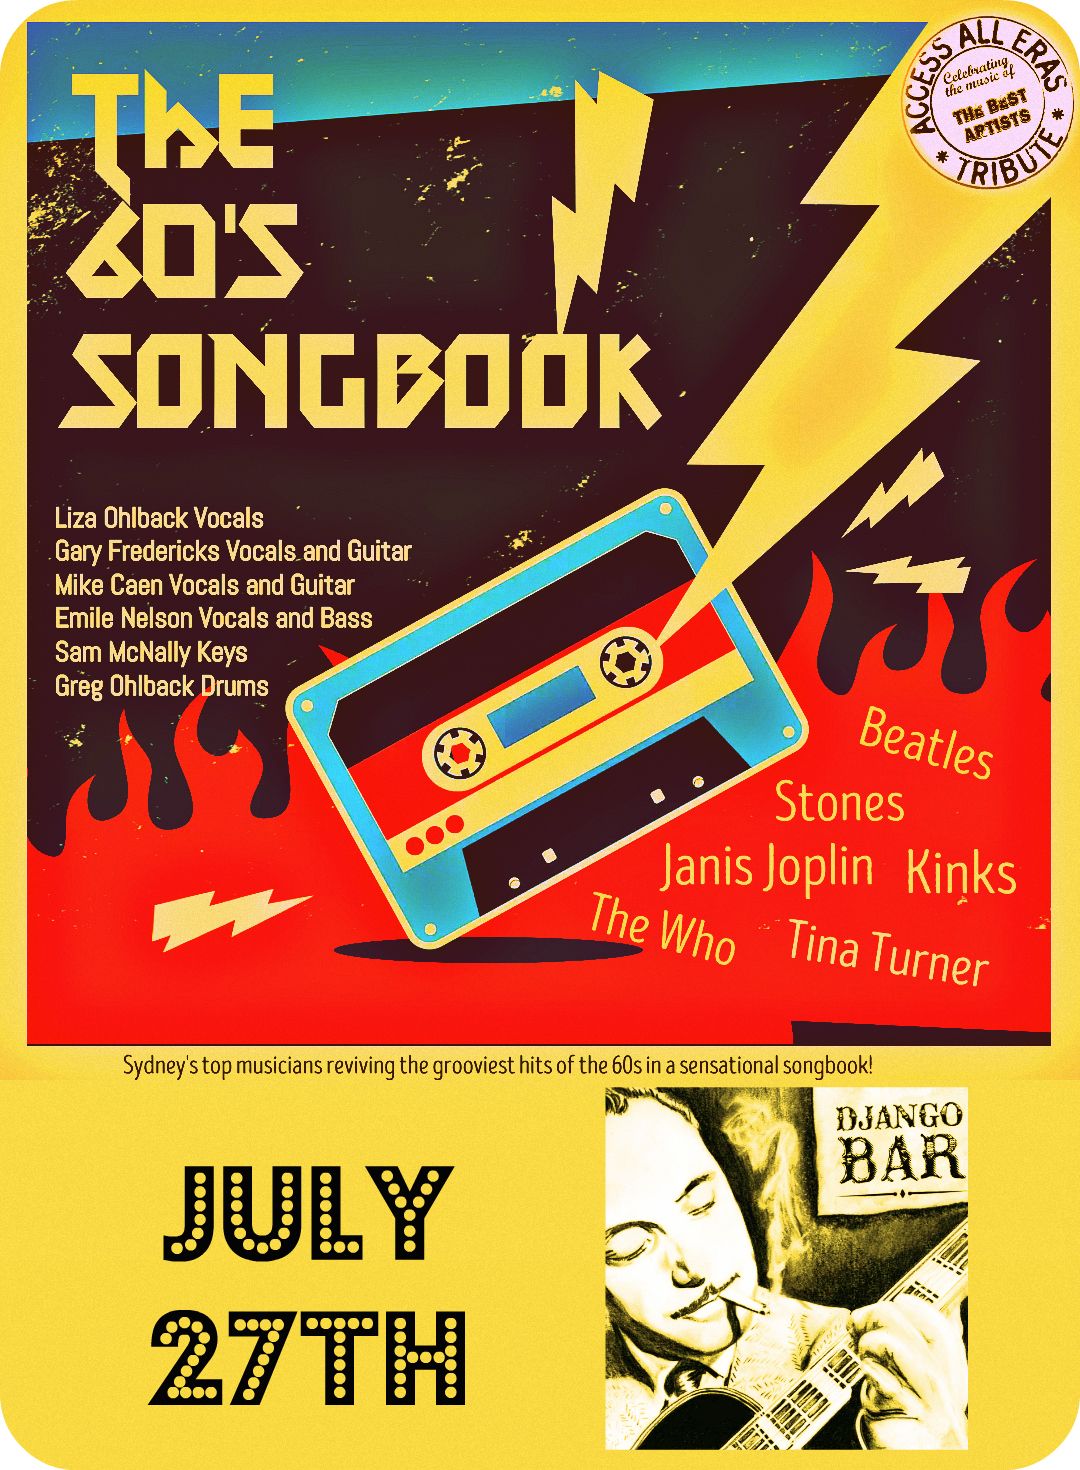 The 60's Songbook at Django @Camelot